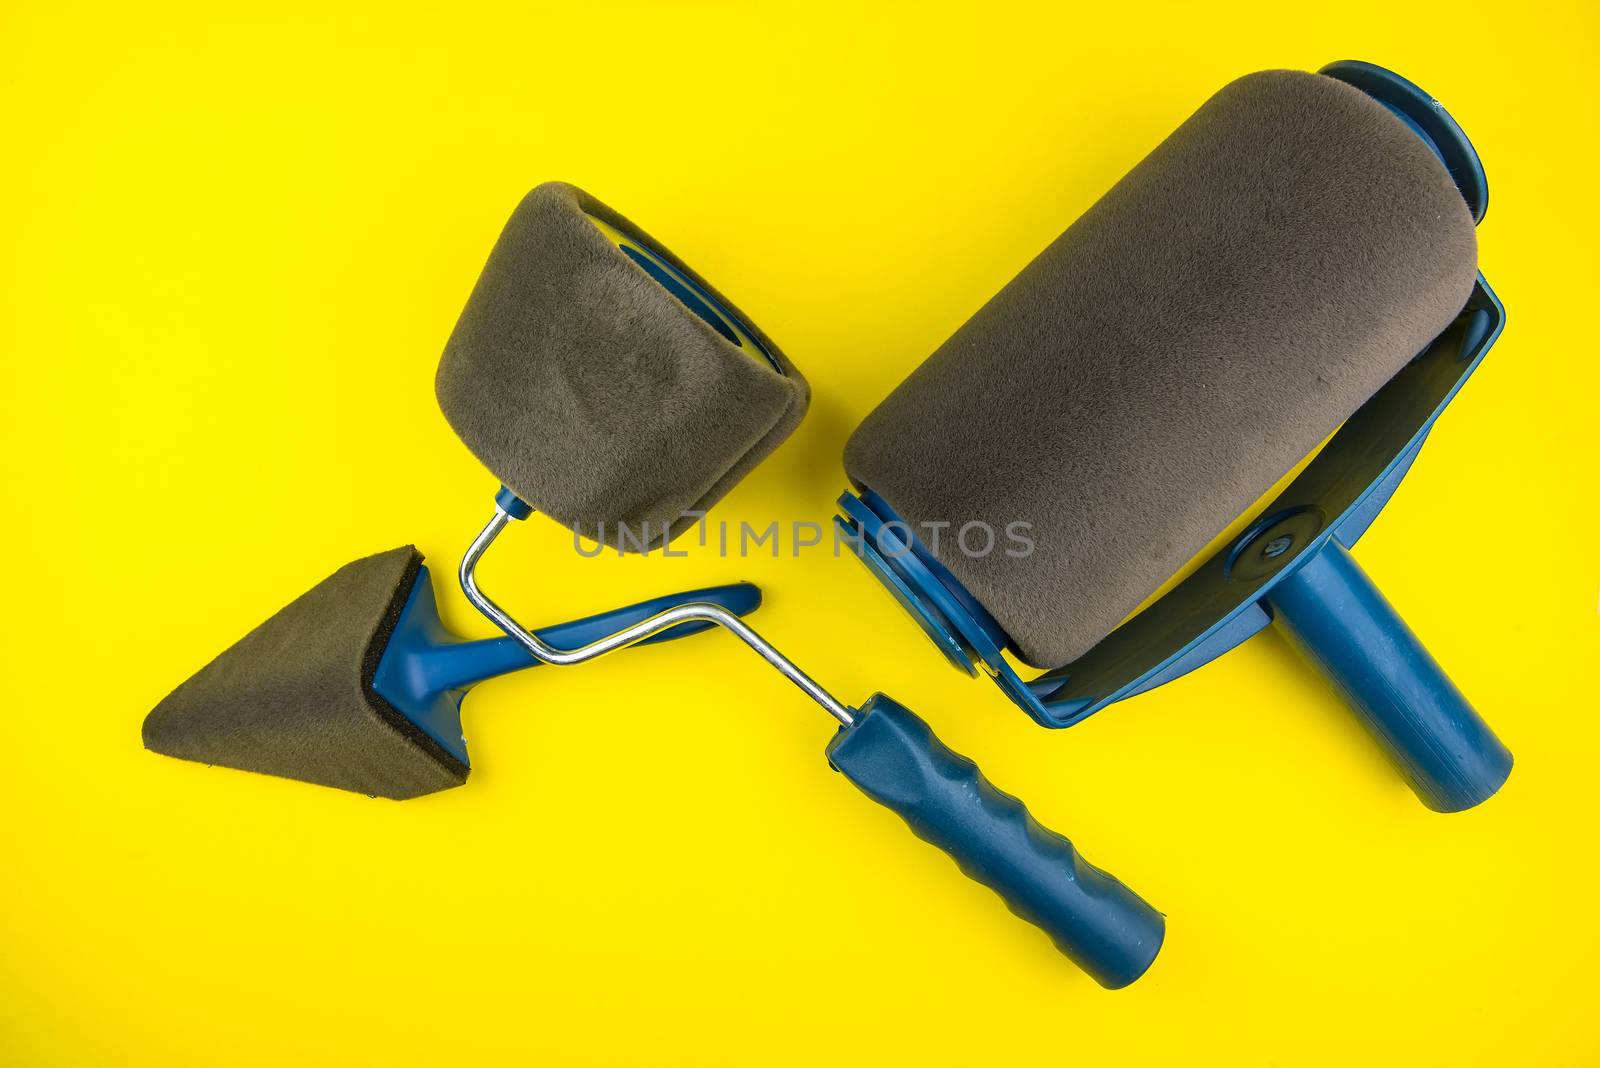 Top view of Paint roller set on yellow background with copy spac by Bubbers